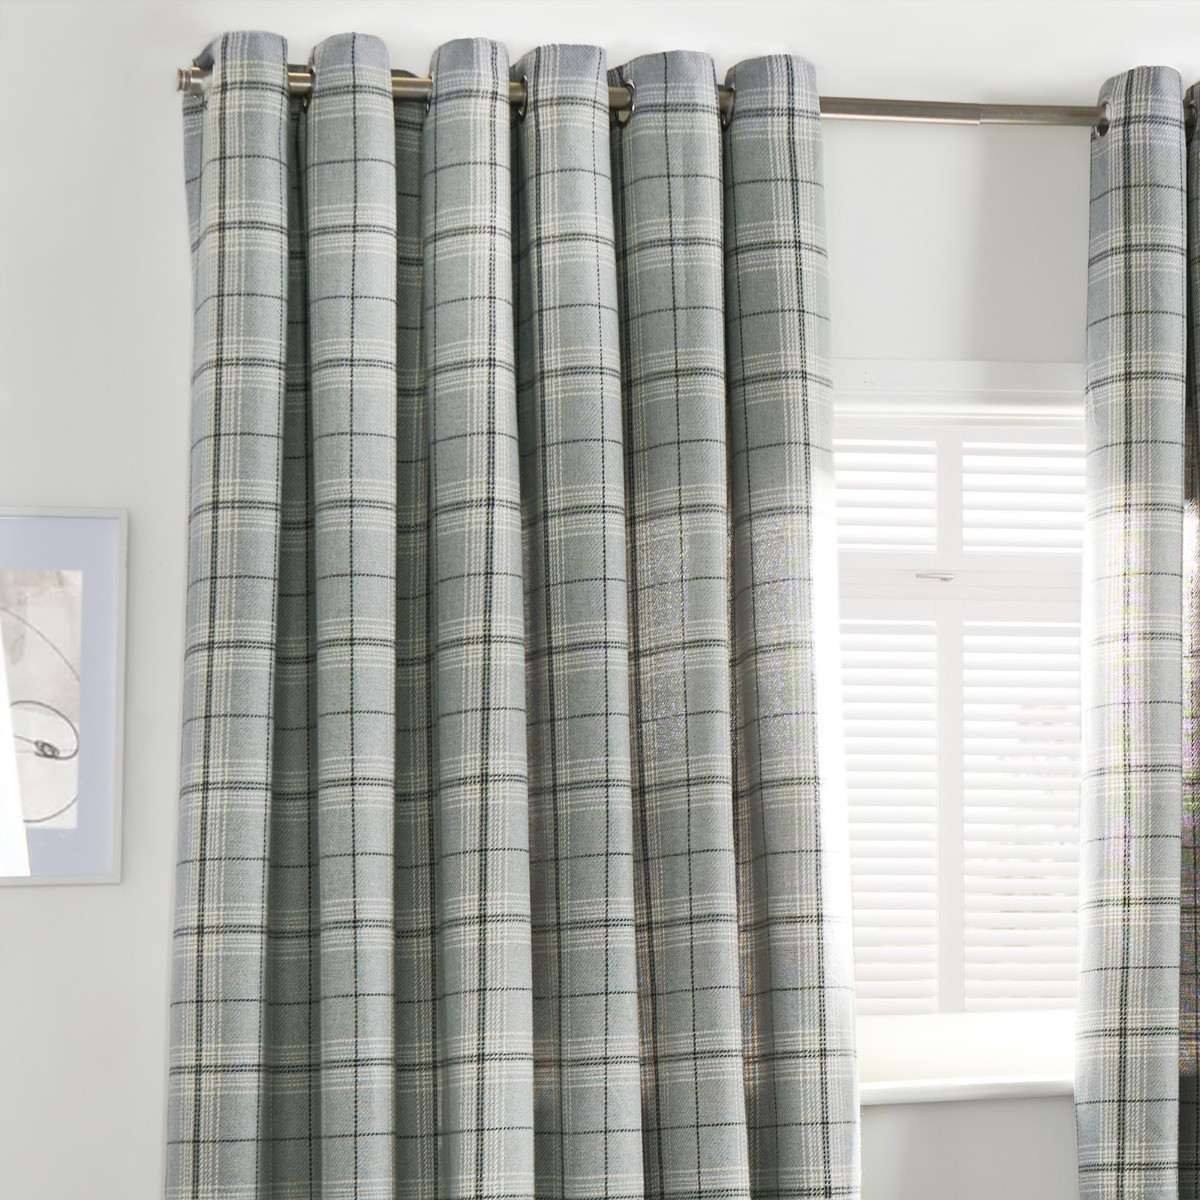 OHS Woven Check Eyelet Curtains - Grey>